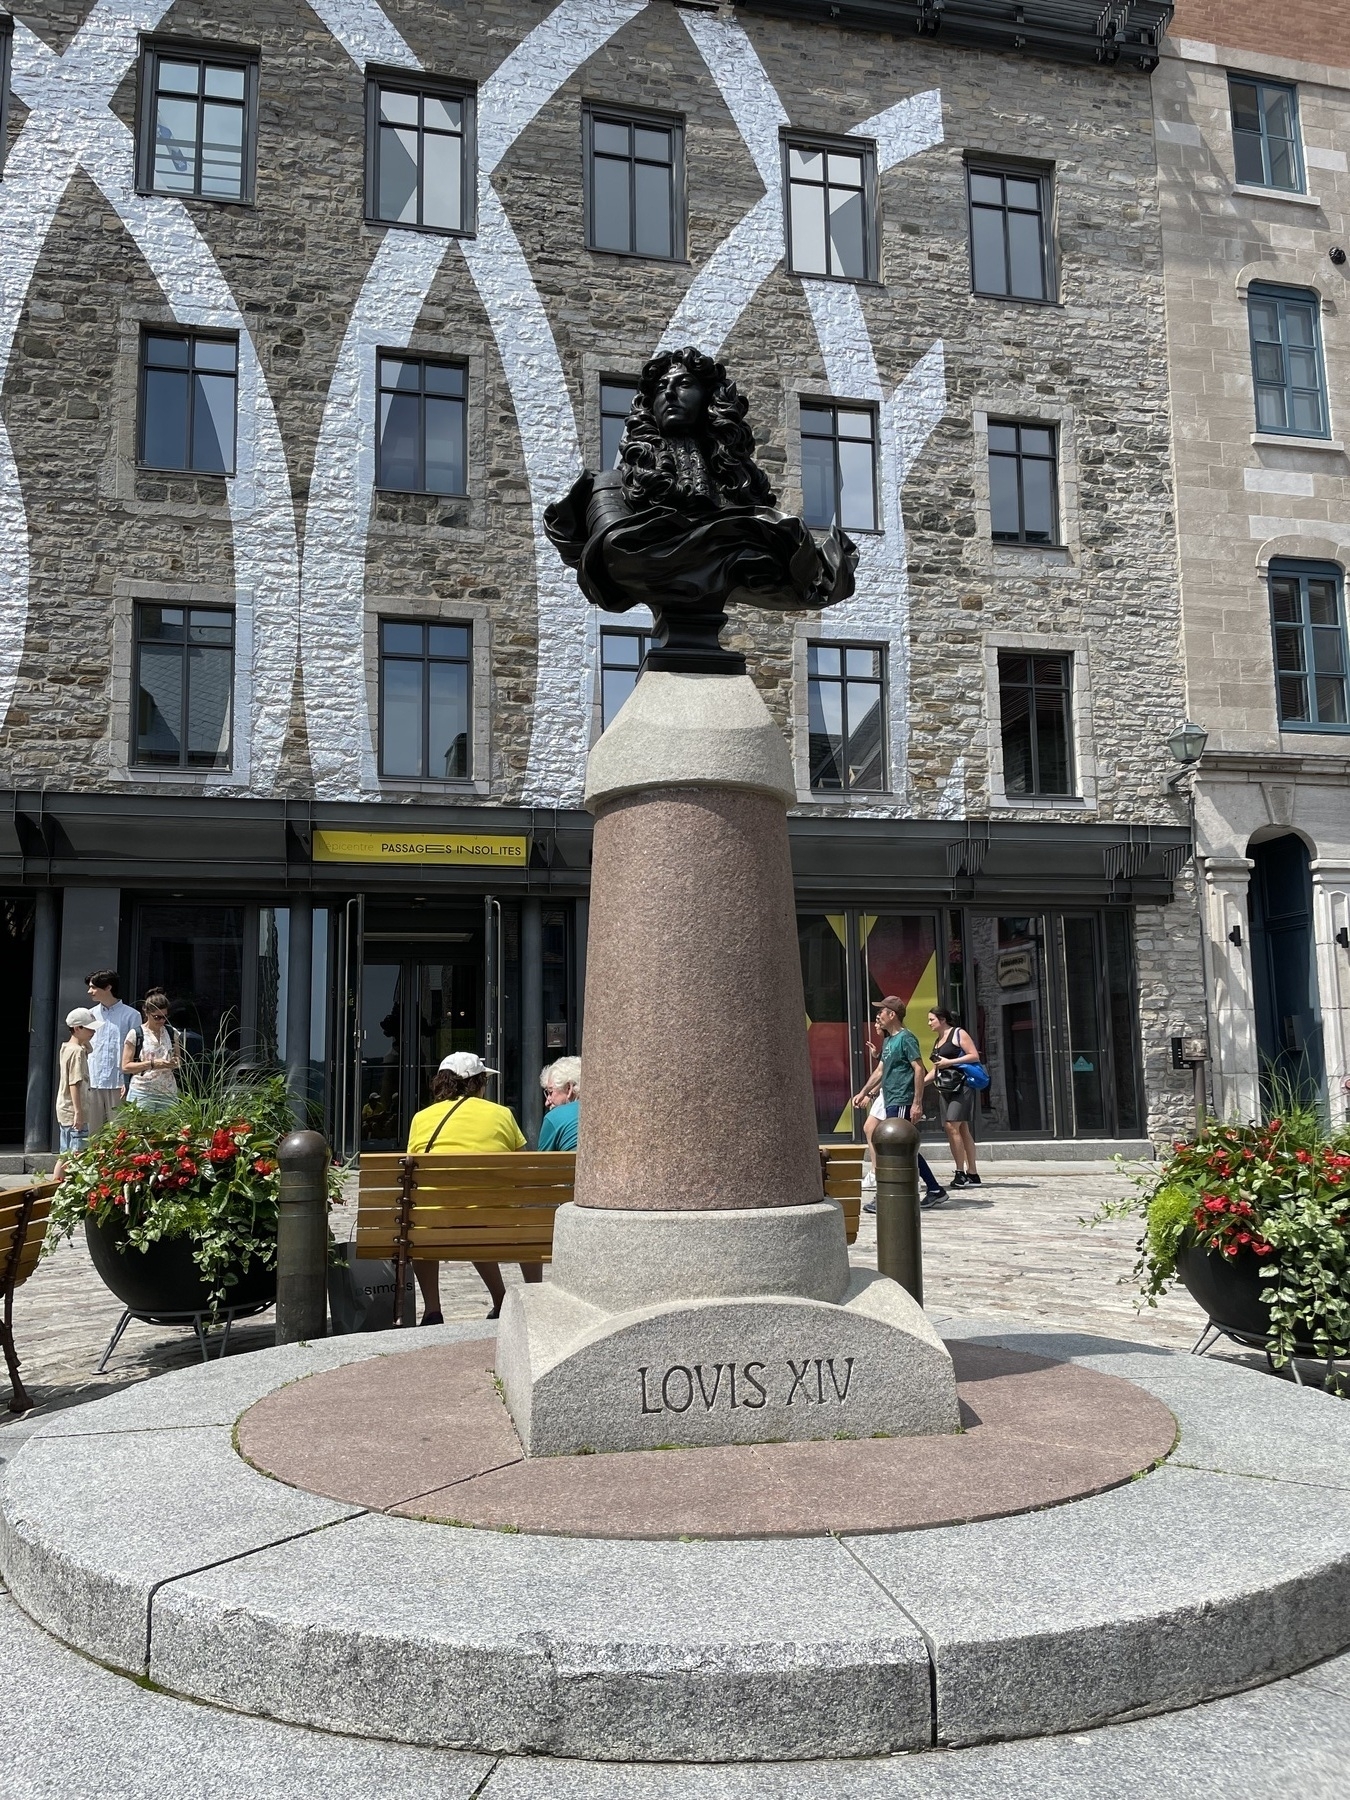 Mighty King Louis XIV a statue that sits in place royale, Quebec City